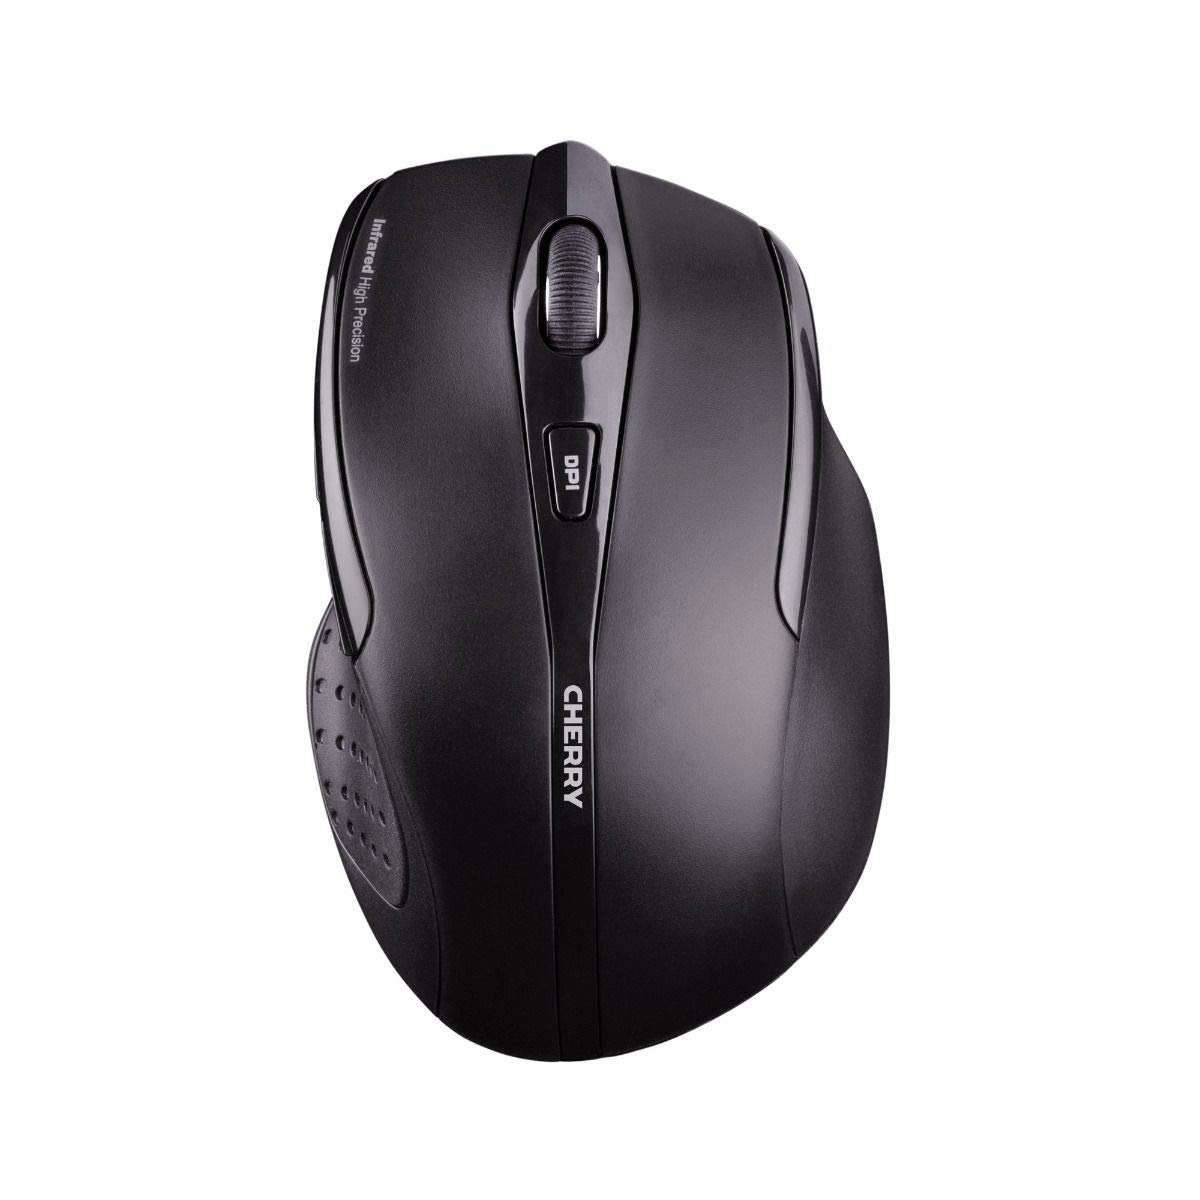 OPTICAL INFRARED WIRELESS MOUSE